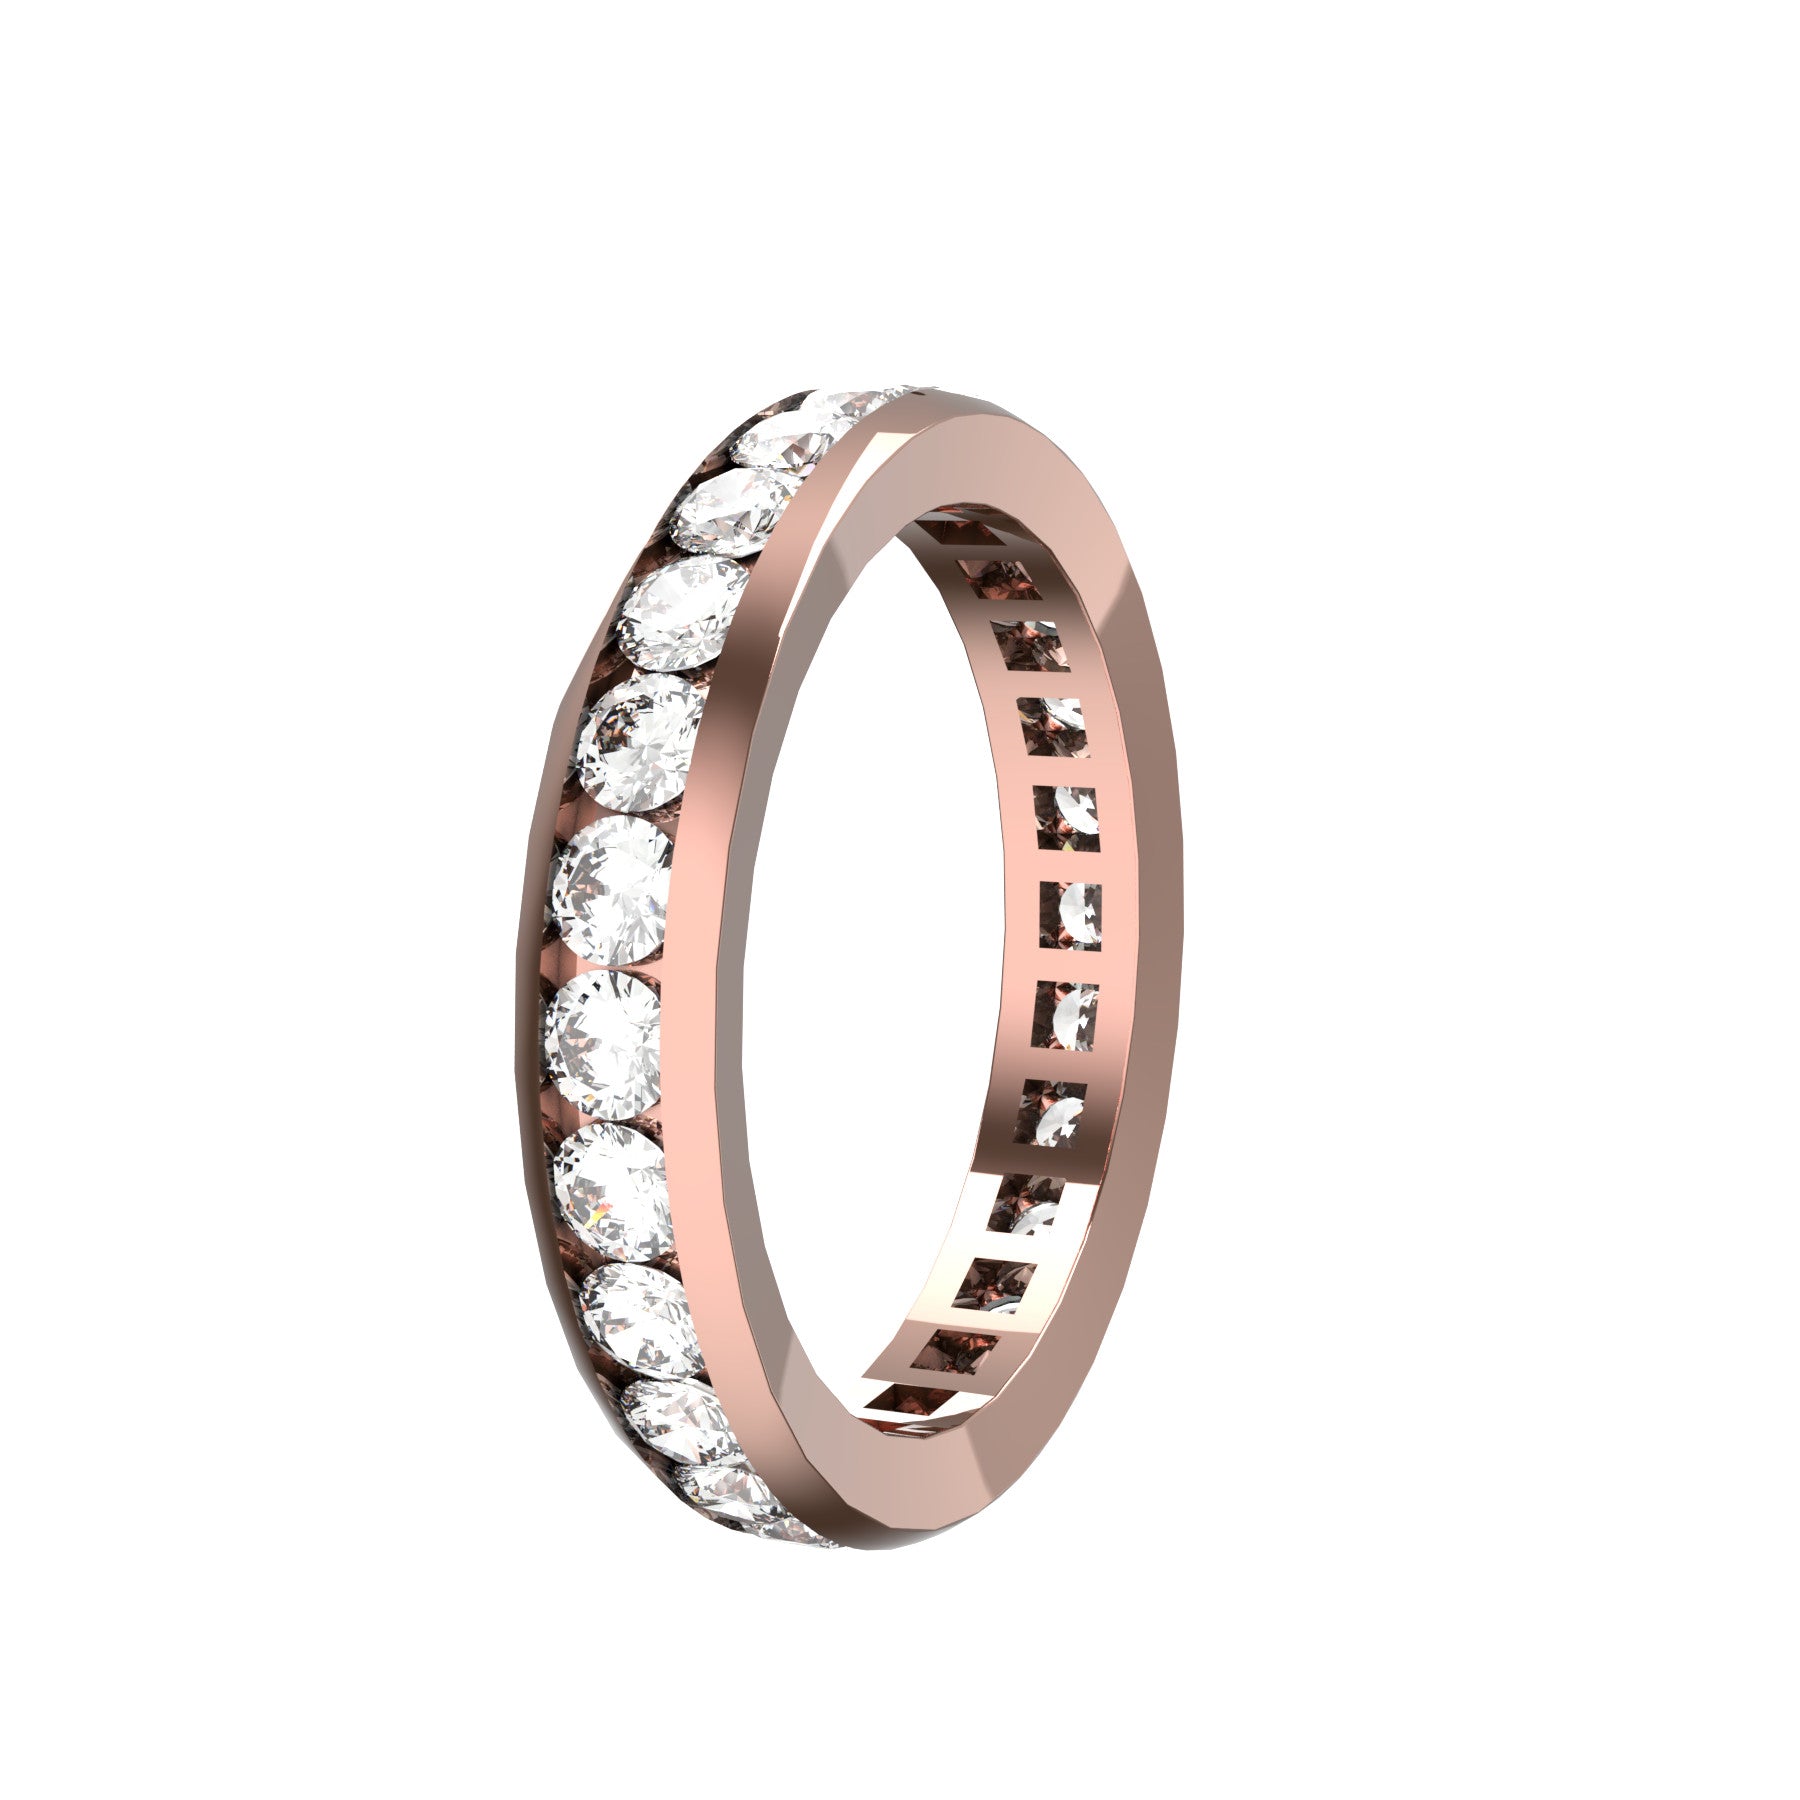  everlasting wedding band, 18 k pink gold, 0,05 ct round natural diamonds, weight about 3,50 g. (0,12 oz), width 3,70 mm